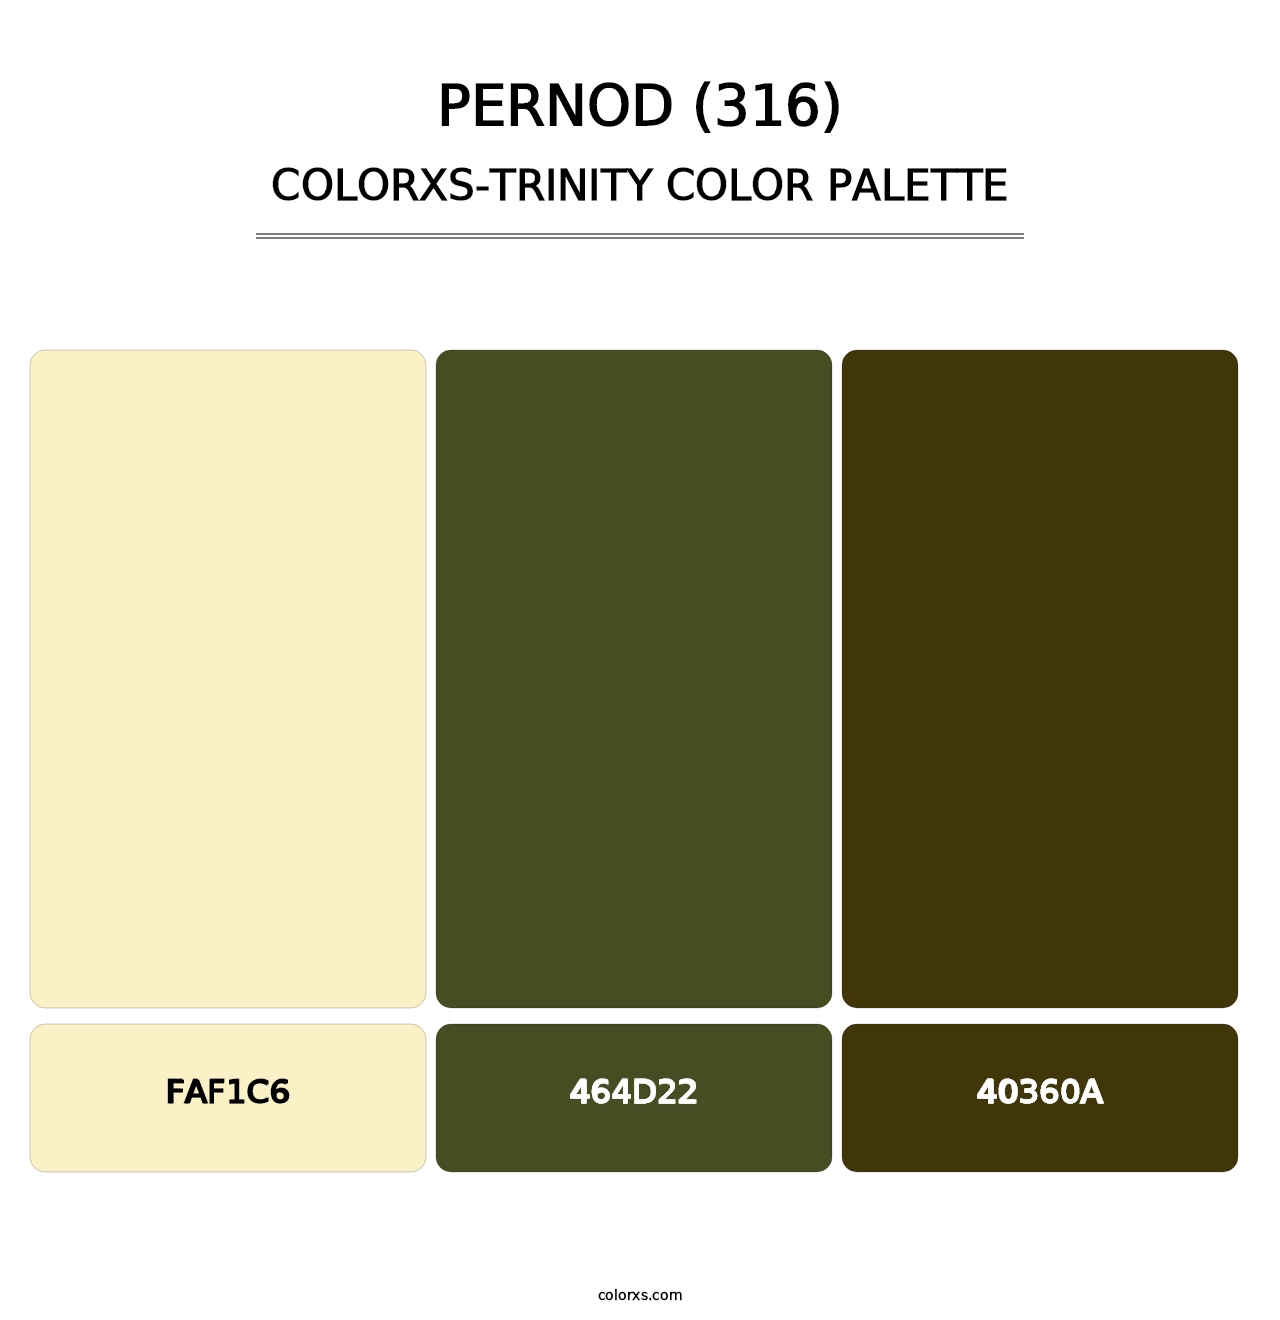 Pernod (316) - Colorxs Trinity Palette